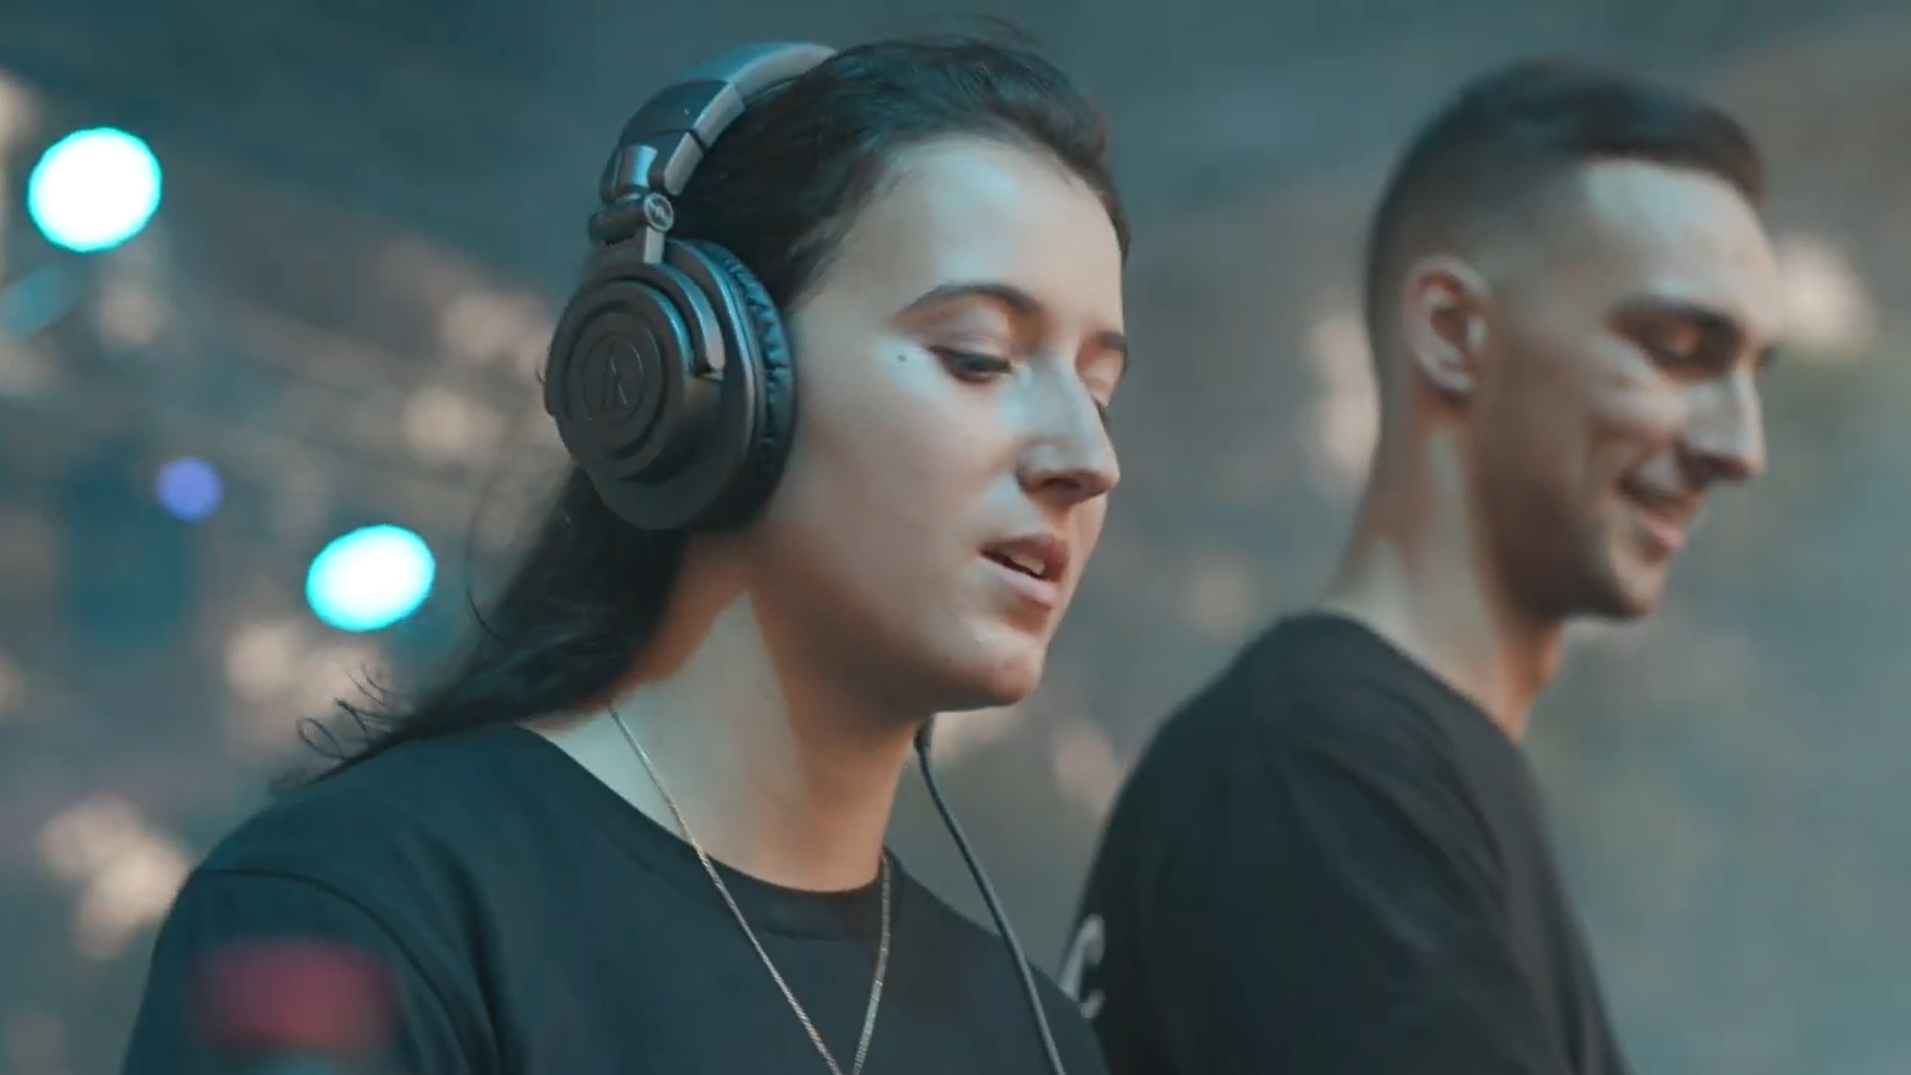 two people with headphones on playing a music set